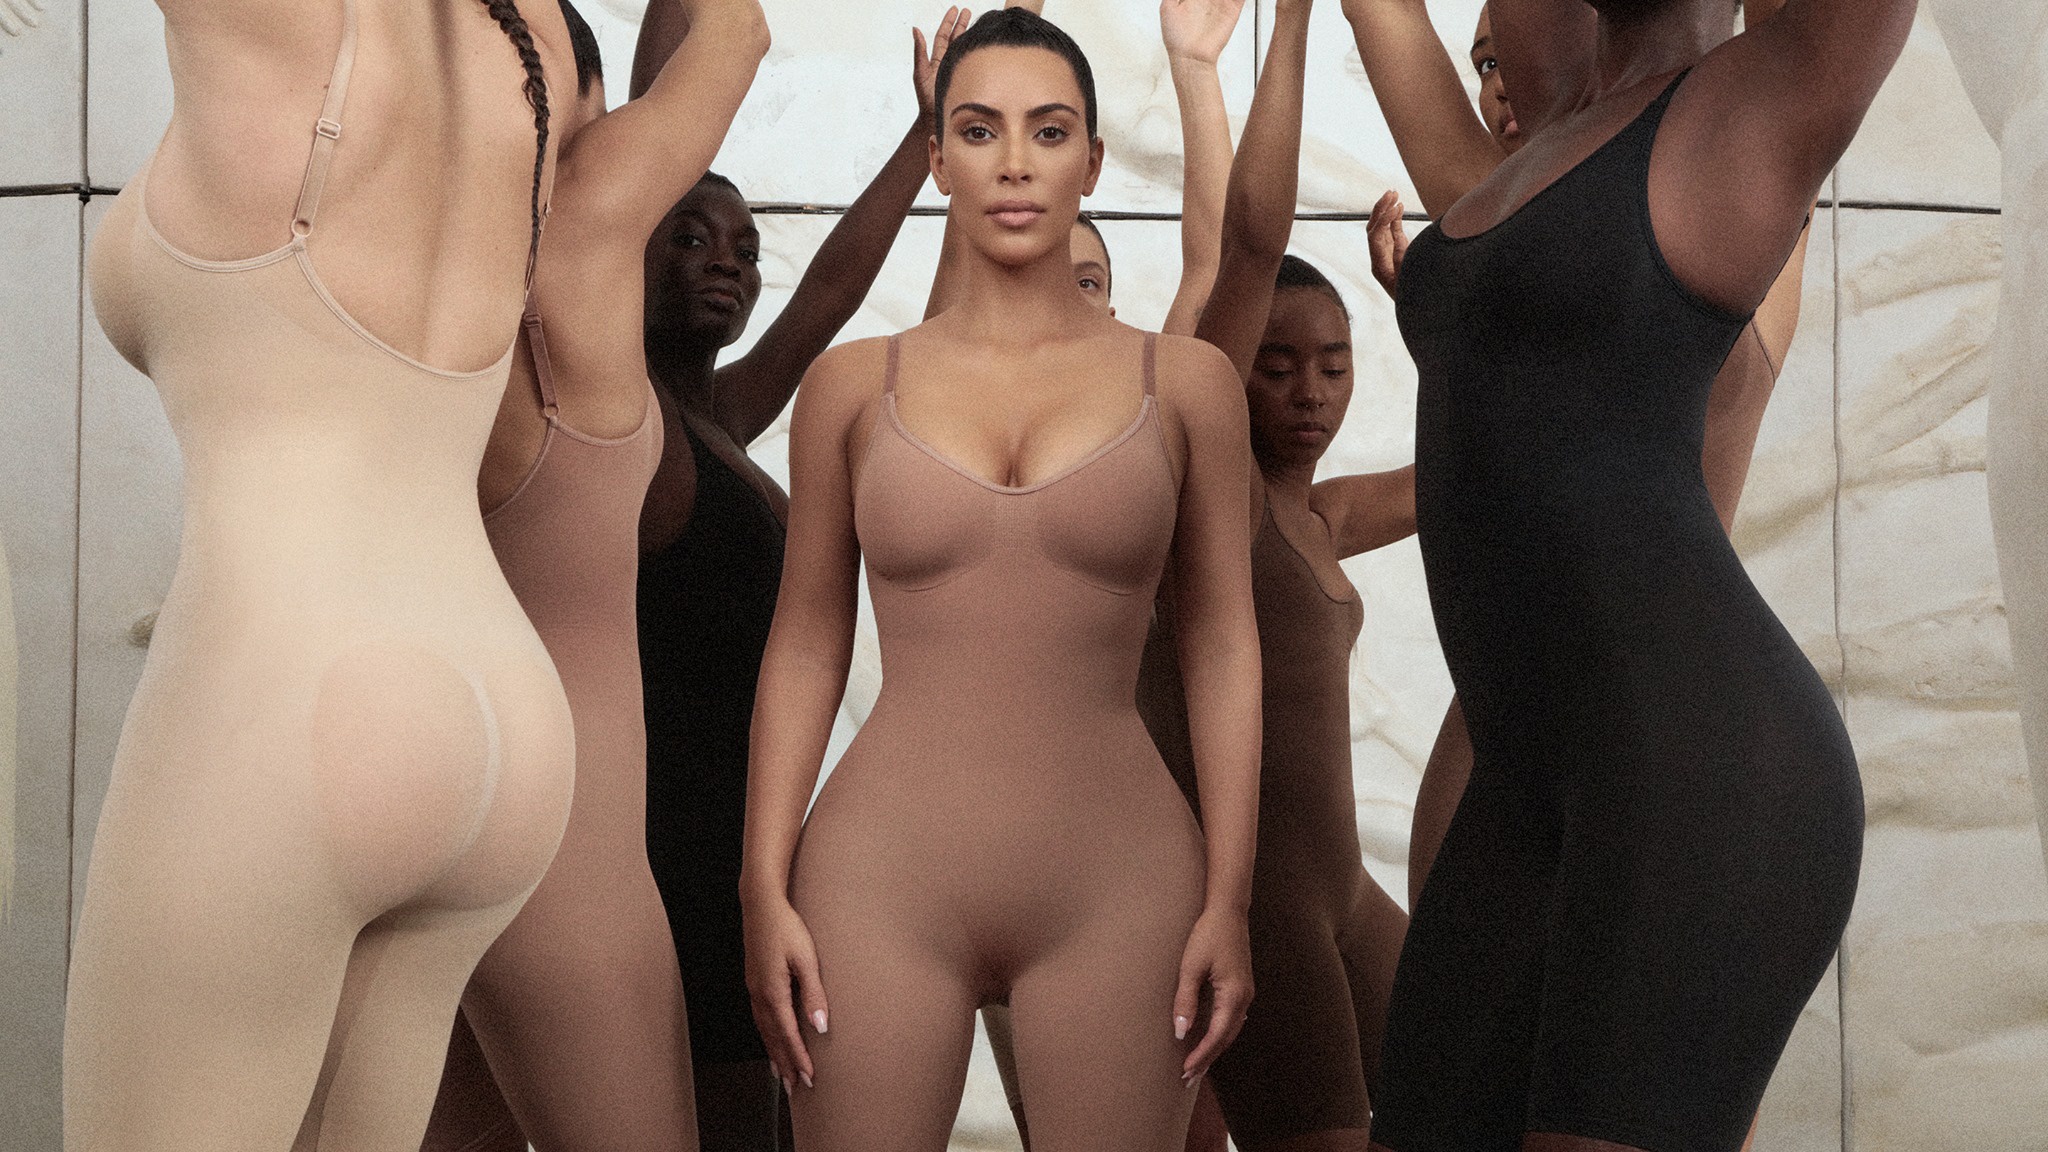 Kim Kardashian has plans for global domination, revealing that her billion-dollar shapewear brand, SKIMS, is launching in China. But will Chinese consumers buy it? Photo: SKIMS